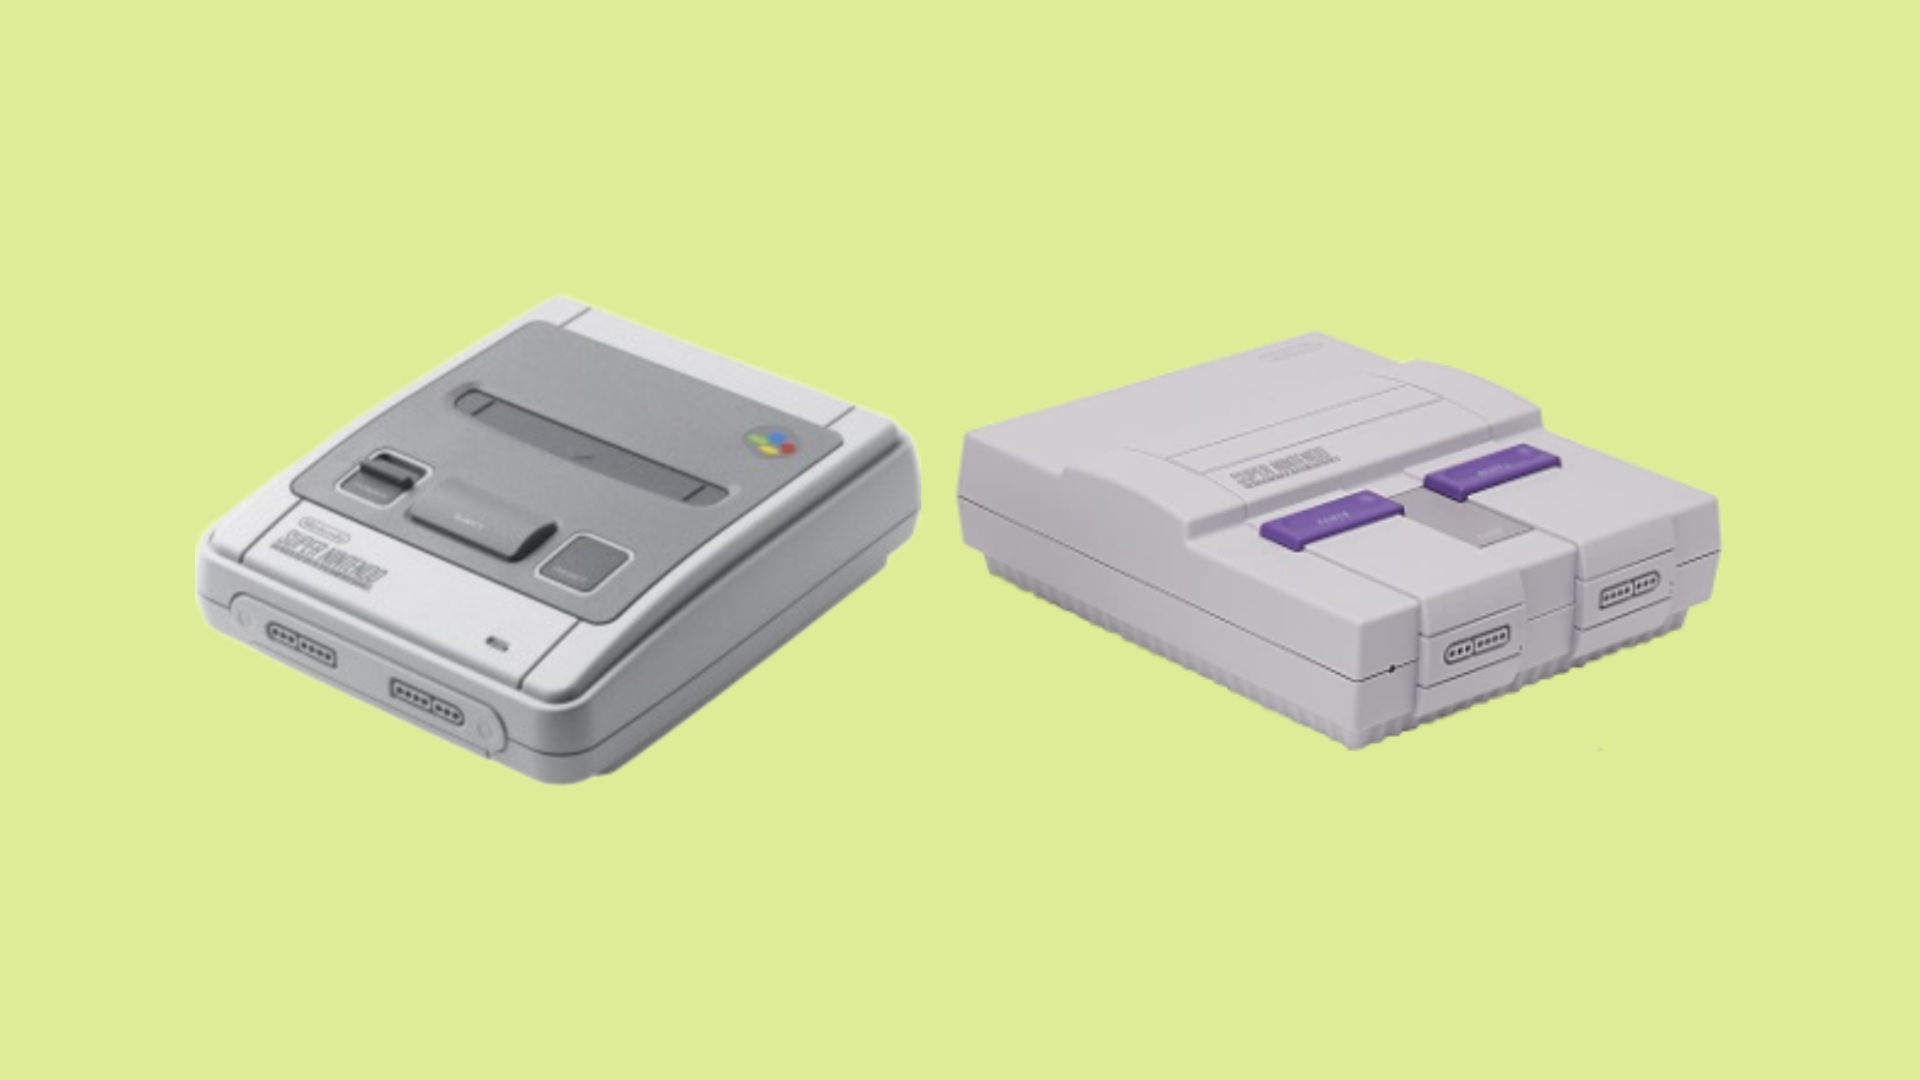 Everything you need to know about the Super NES Classic Edition